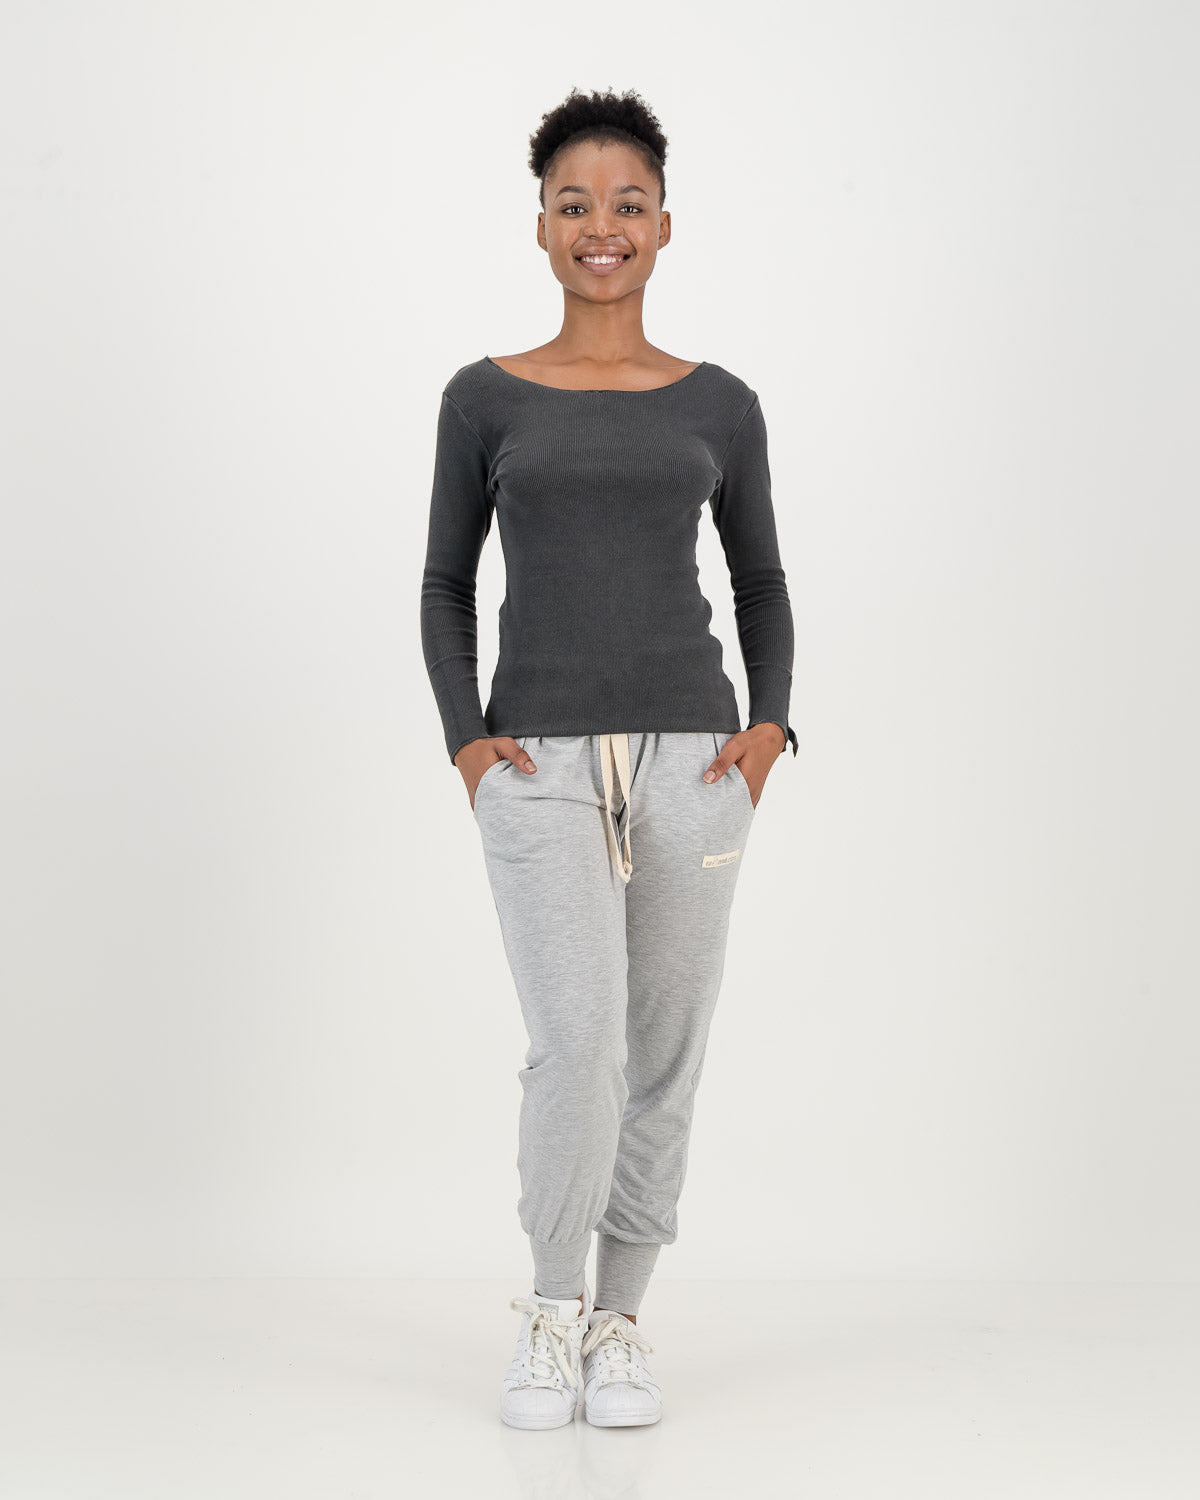 Overdyed Cotton charcoal Rib Top with light grey comfy pants